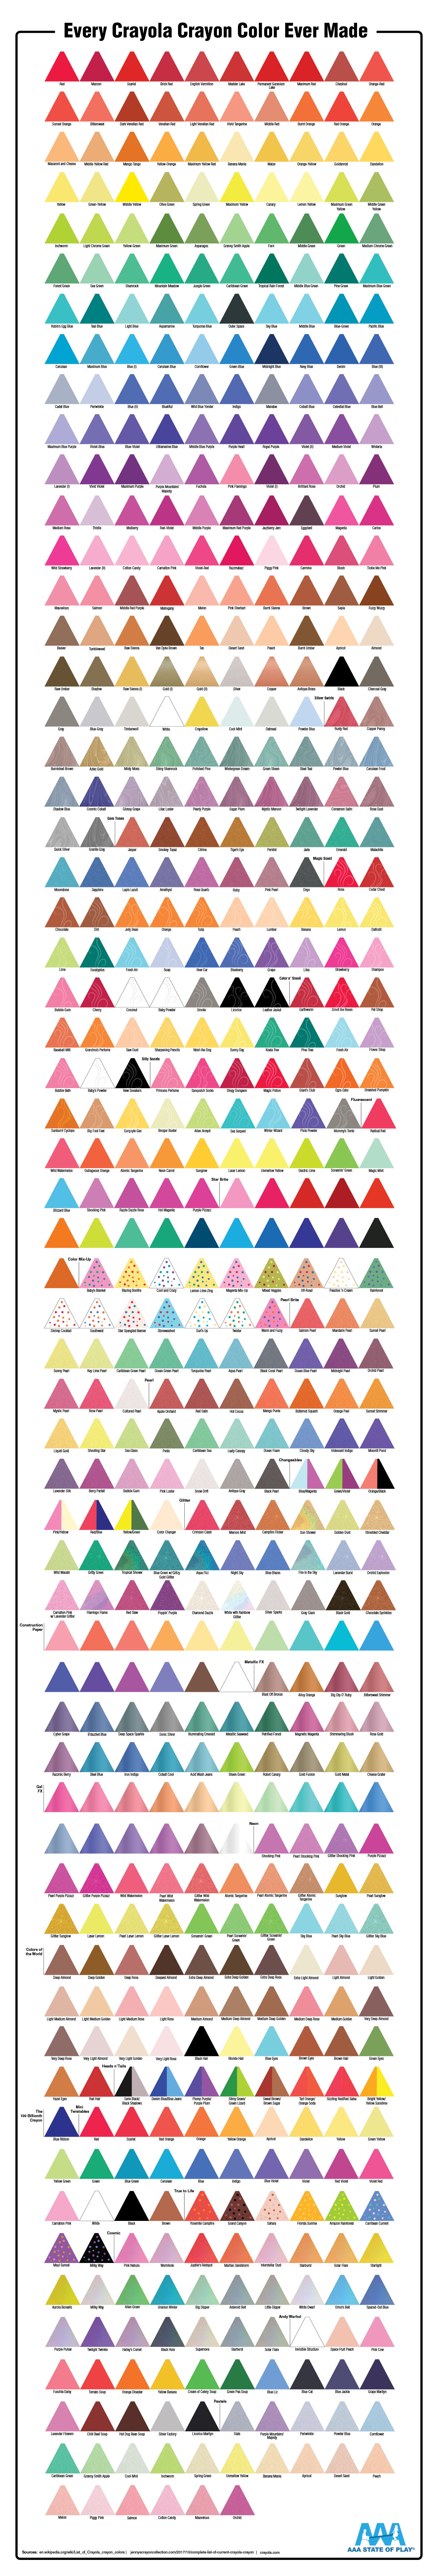 crayons-crazy-colorful-chart